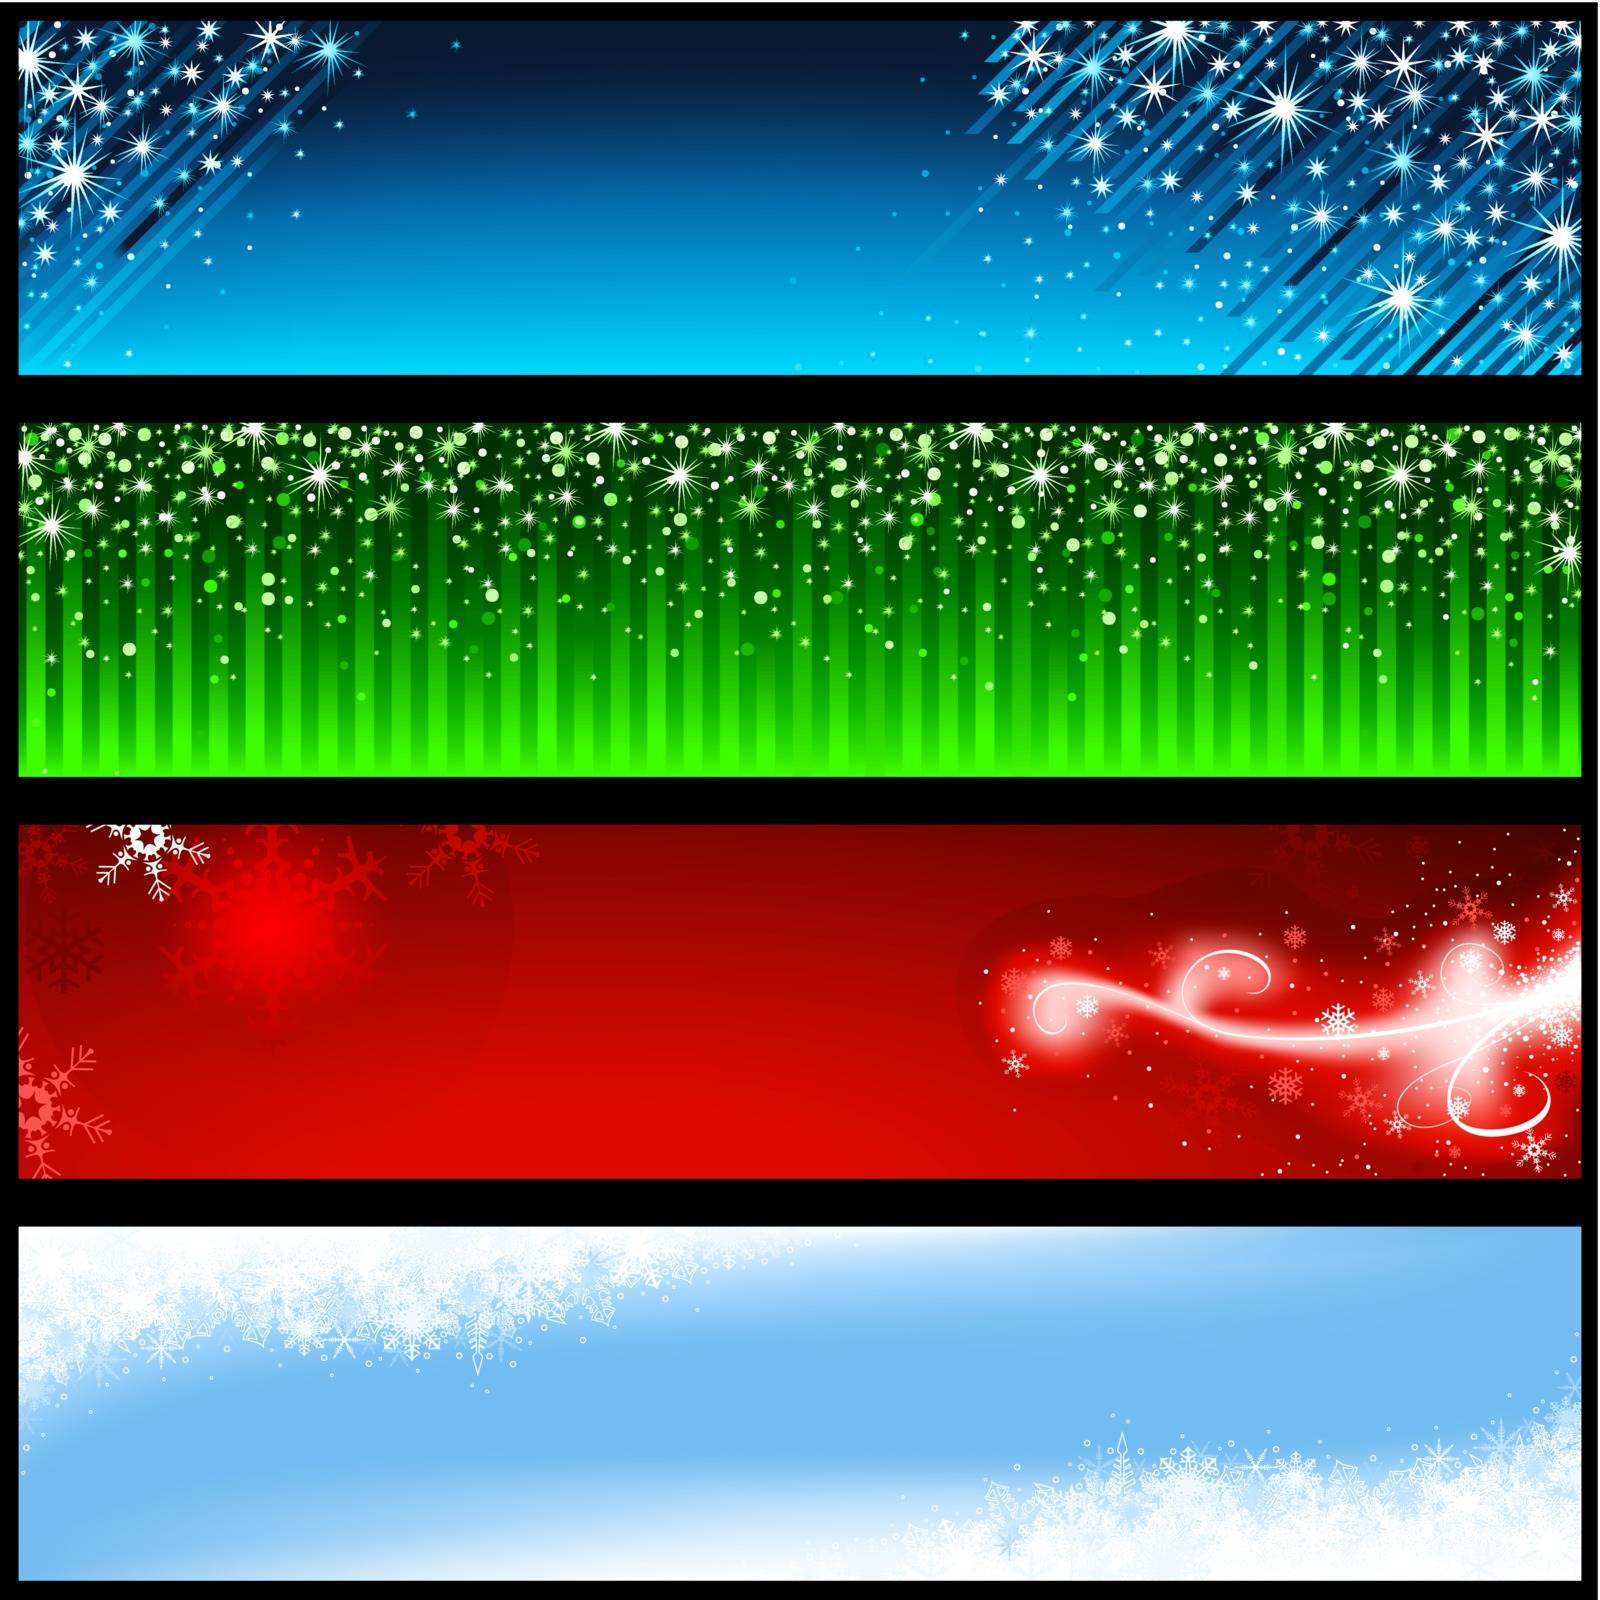 Holiday Banners - Background Illustration, Vector